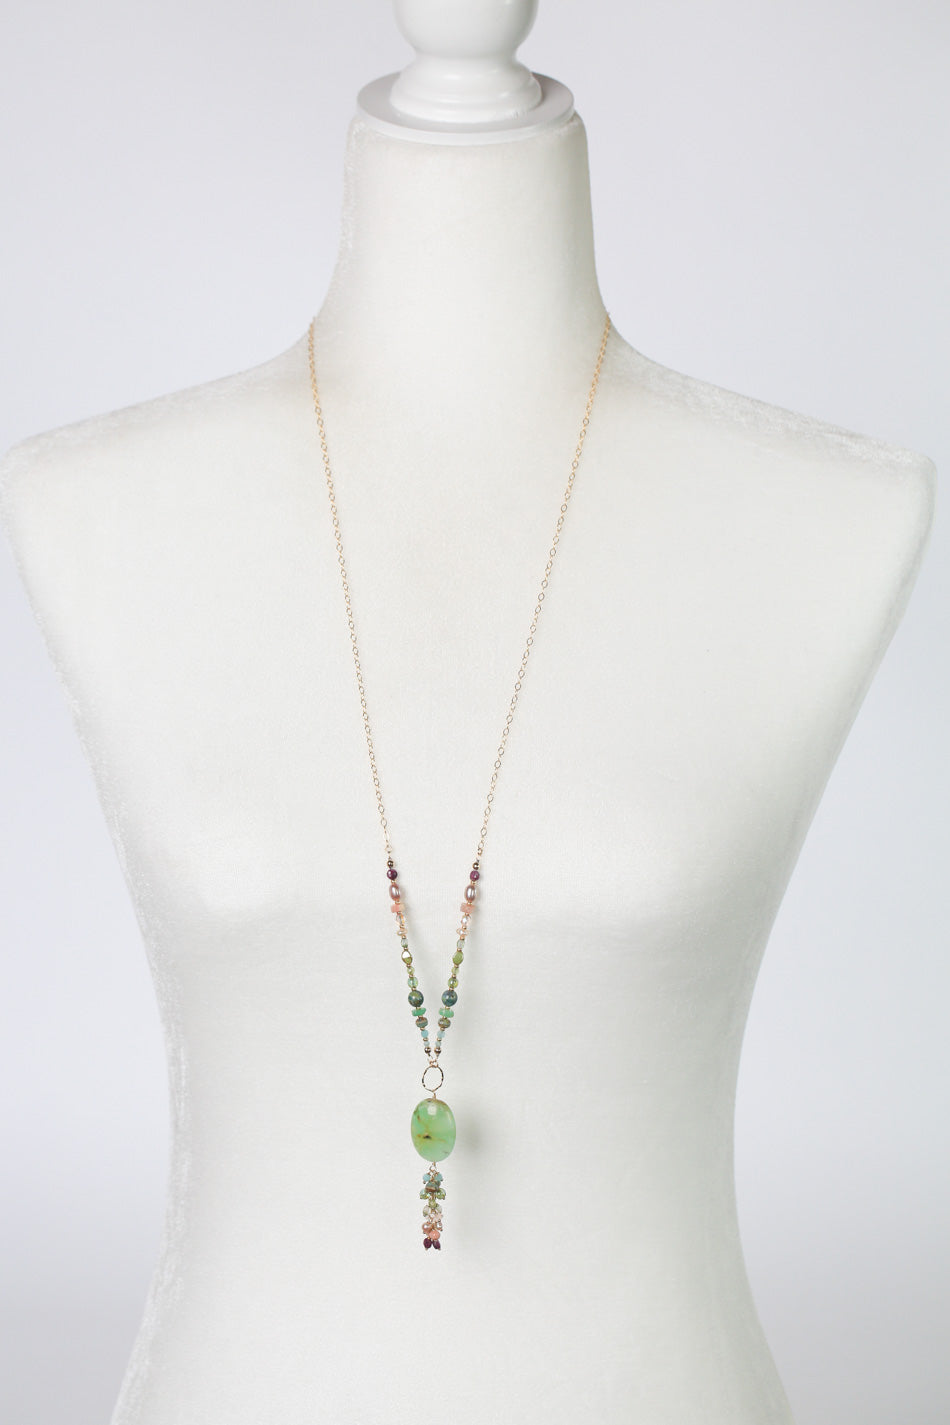 Hope 31-33" Czech Glass, Pearl, Ruby With Chrysoprase Cluster Necklace